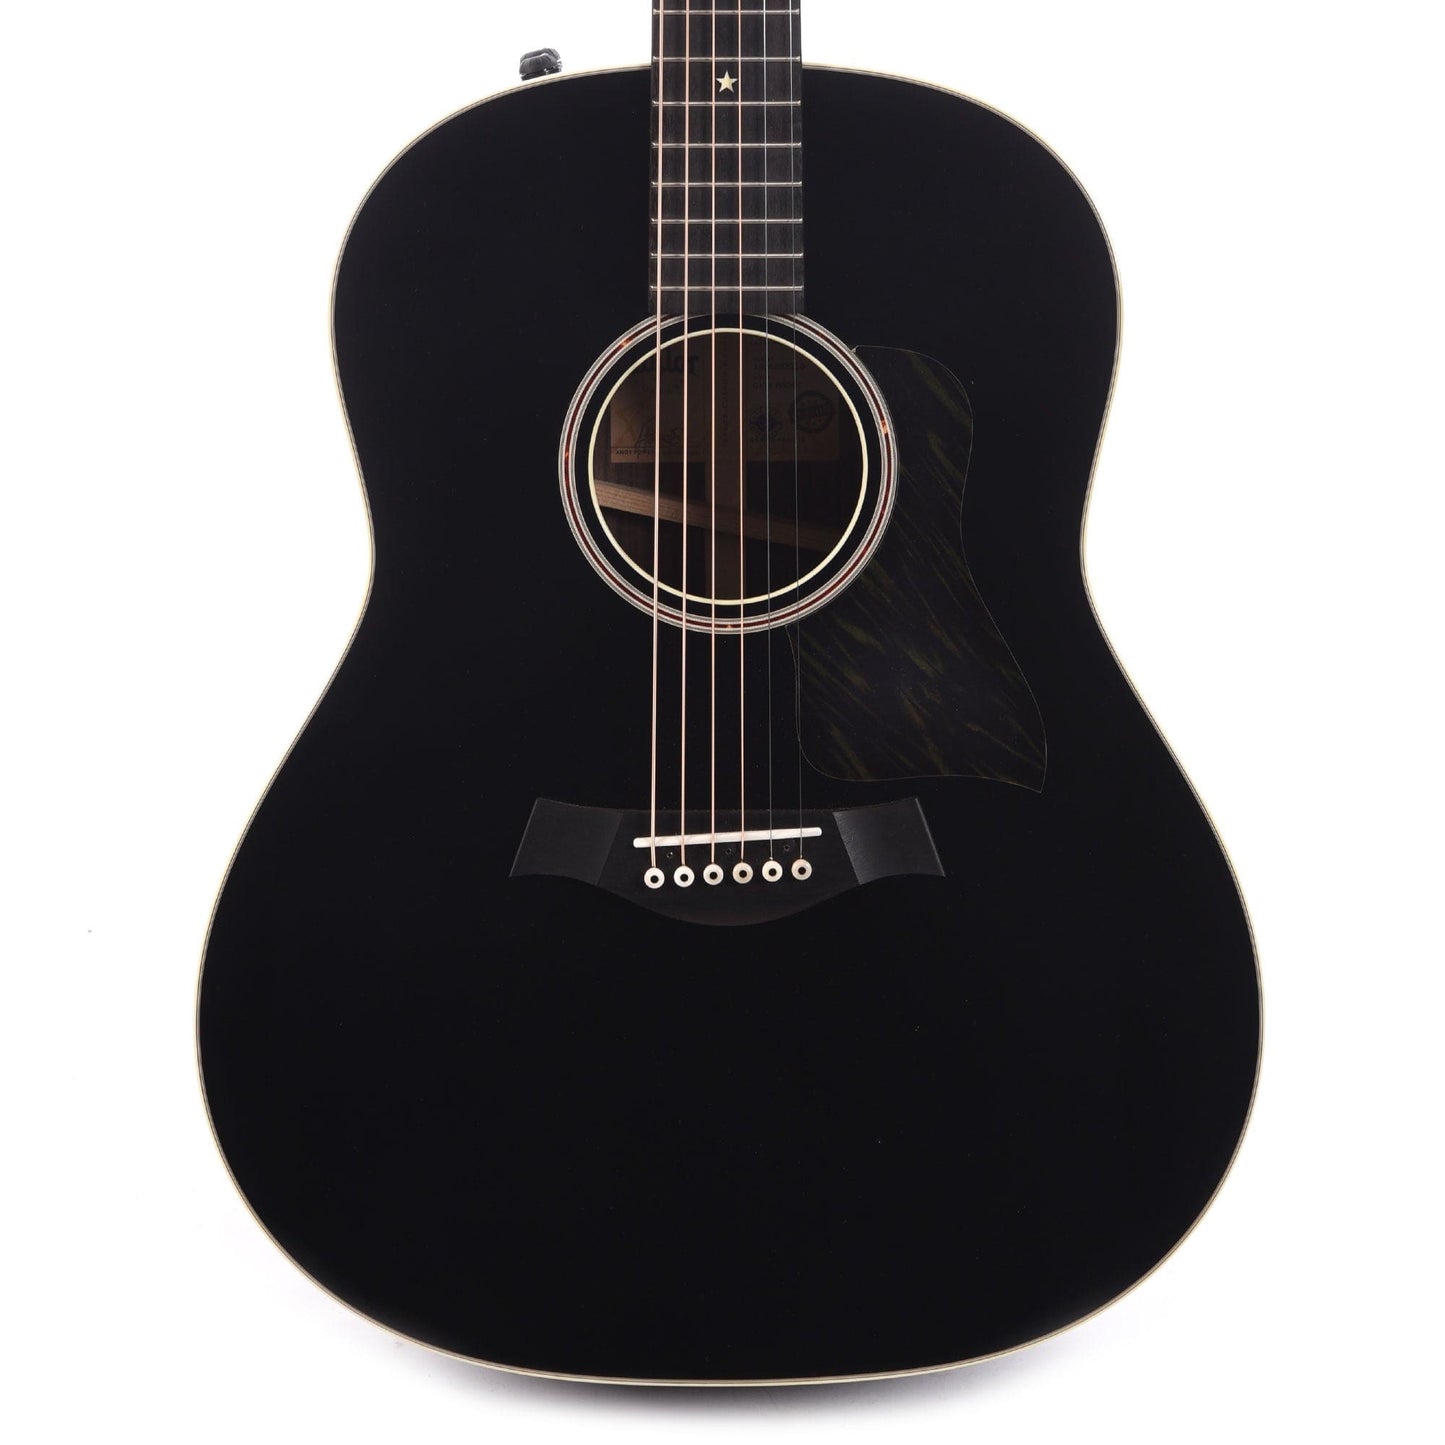 Taylor Custom "Catch" 2023 #047 Grand Pacific Lutz Spruce/Rosewood Black Acoustic Guitars / OM and Auditorium